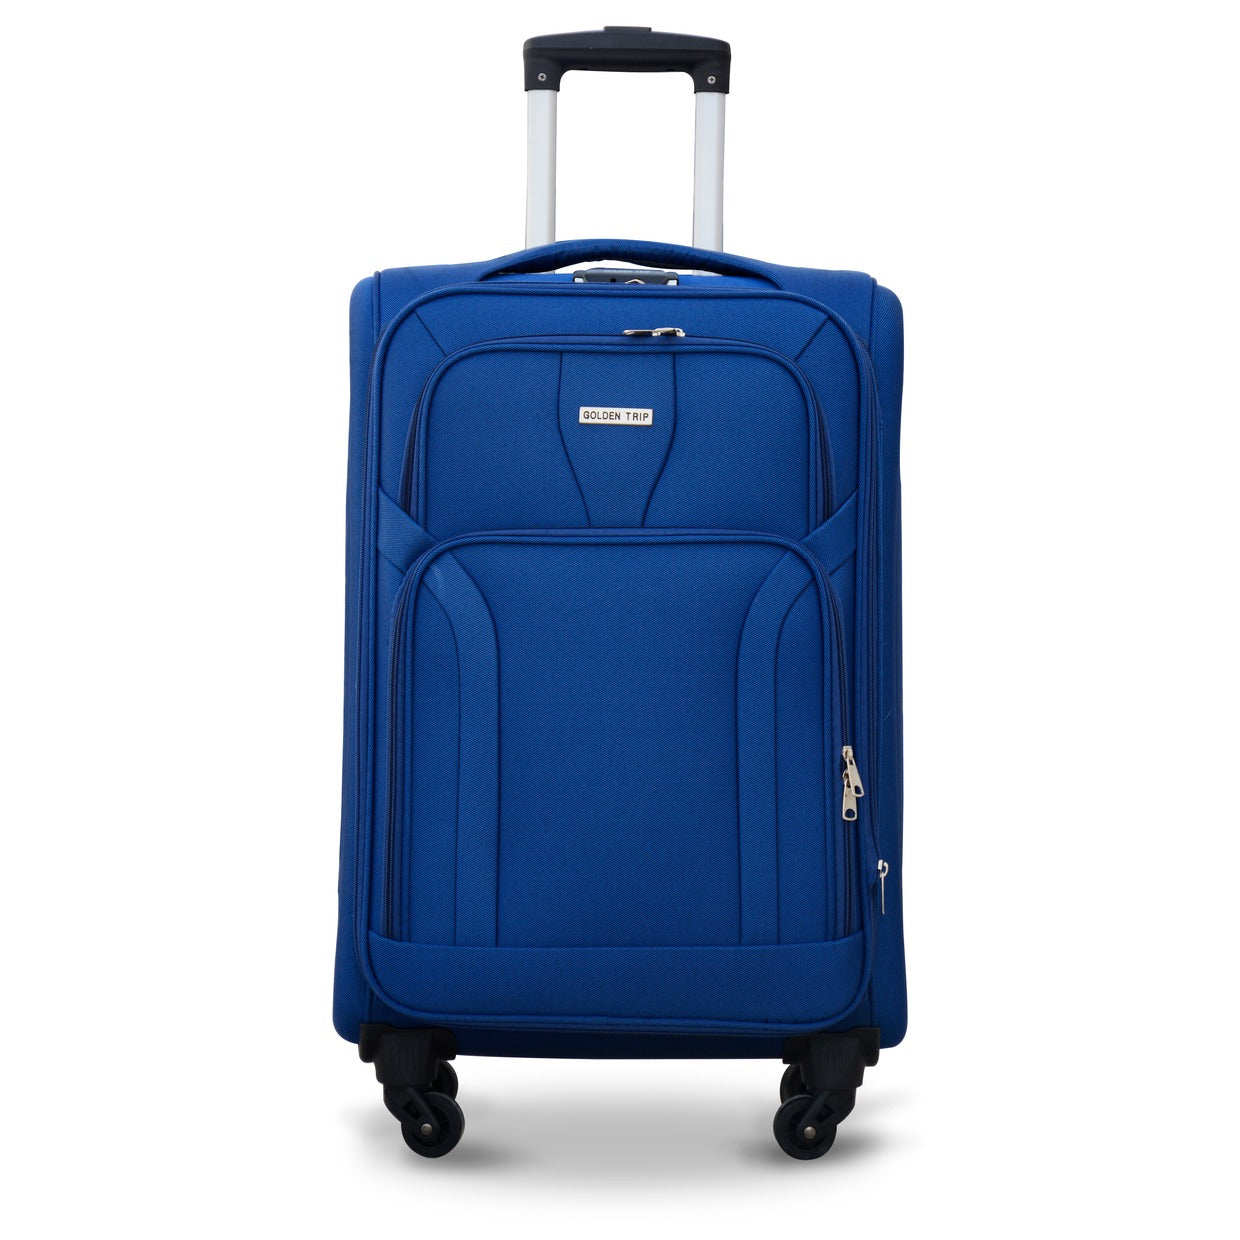 4 Wheel Premium Soft Material Luggage Bag Blue with Cover | Luggage With Cover